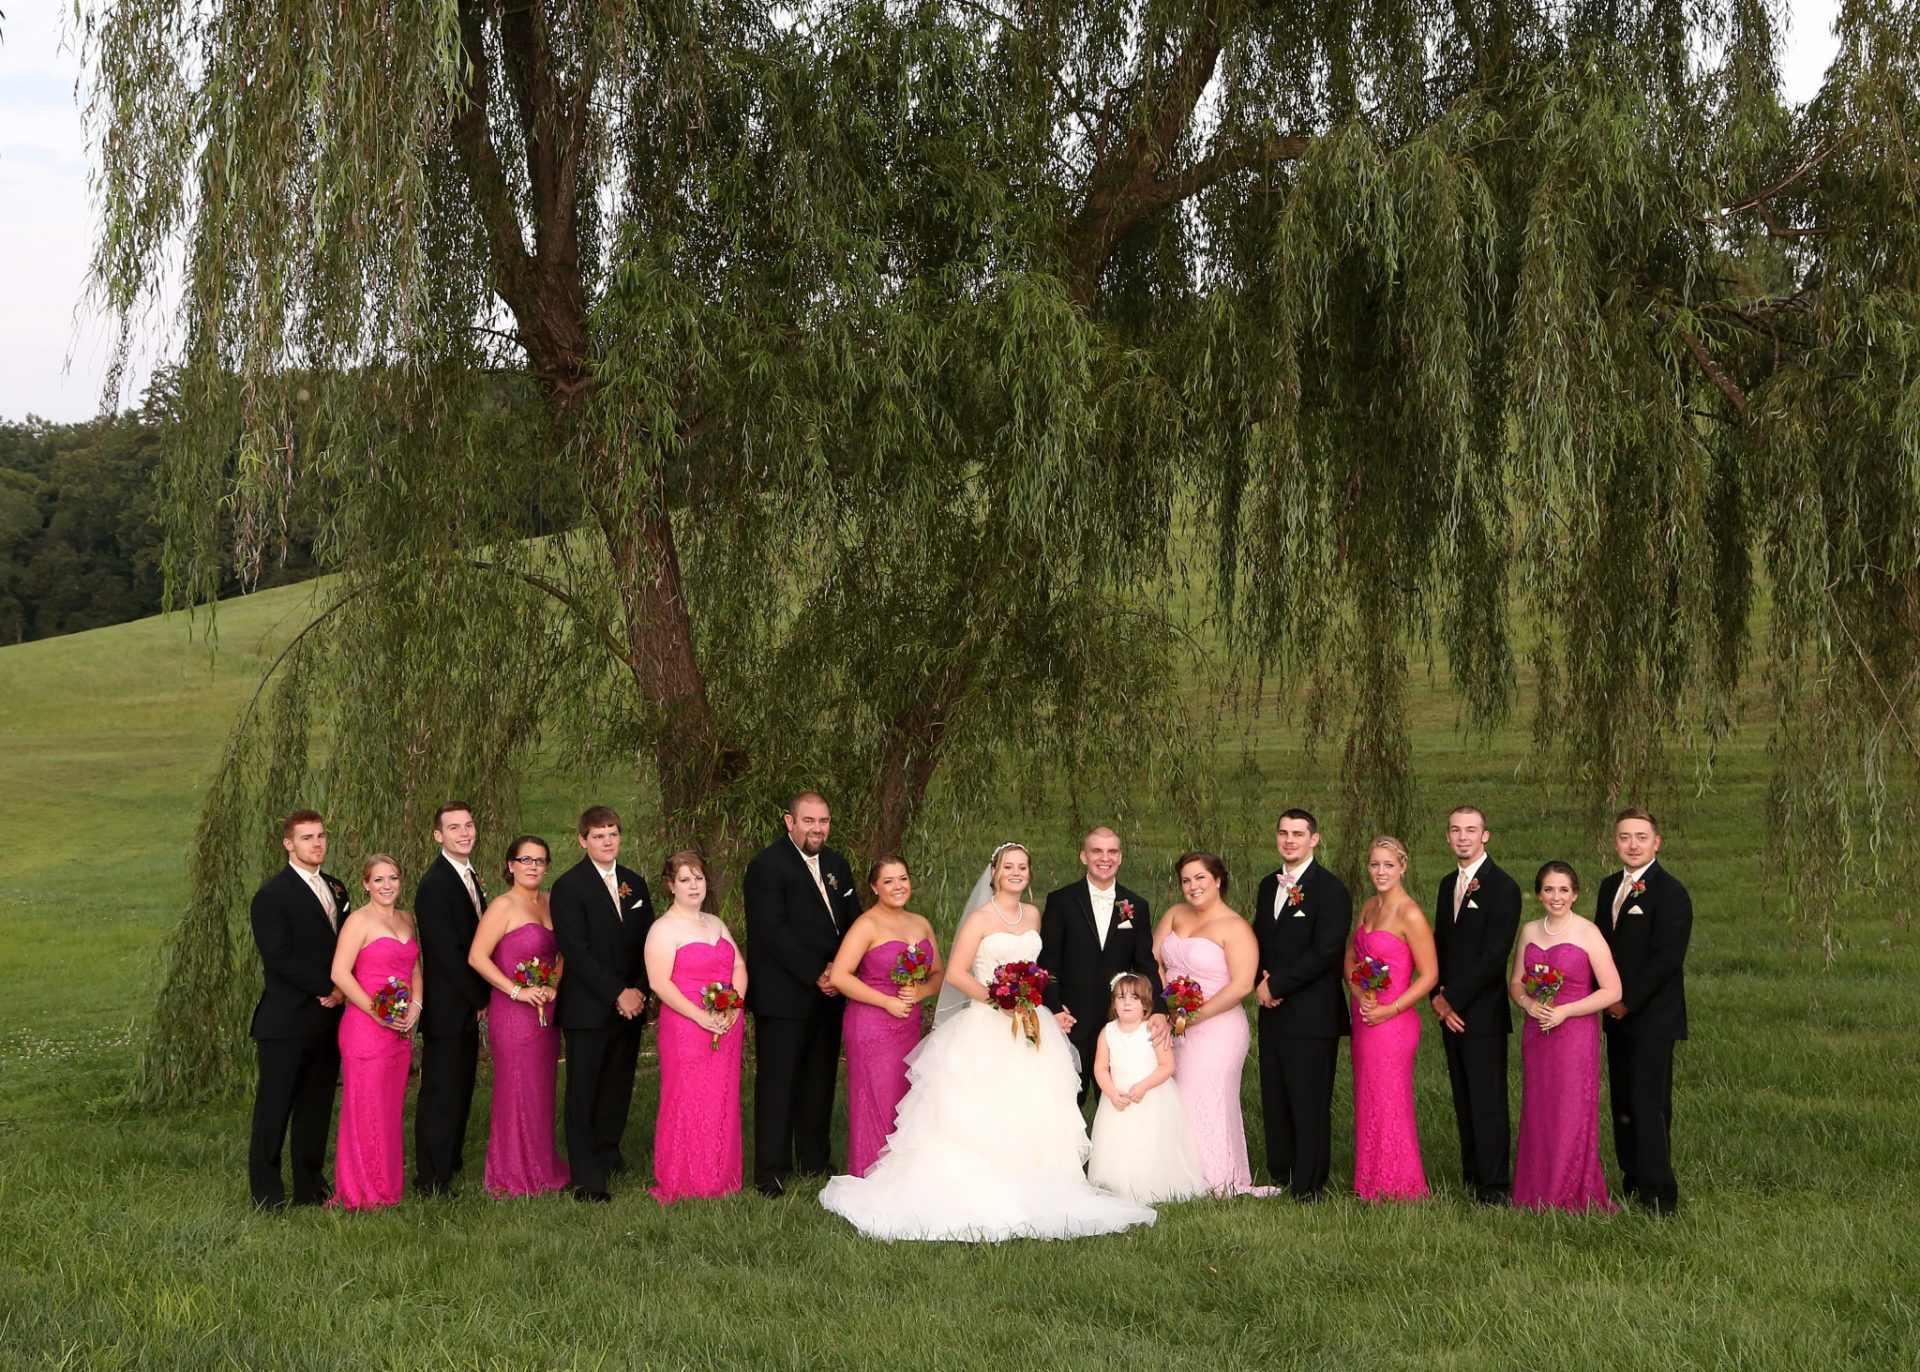 Bridal party poses in front of old willow tree at Morningside Inn, wedding venue in maryland